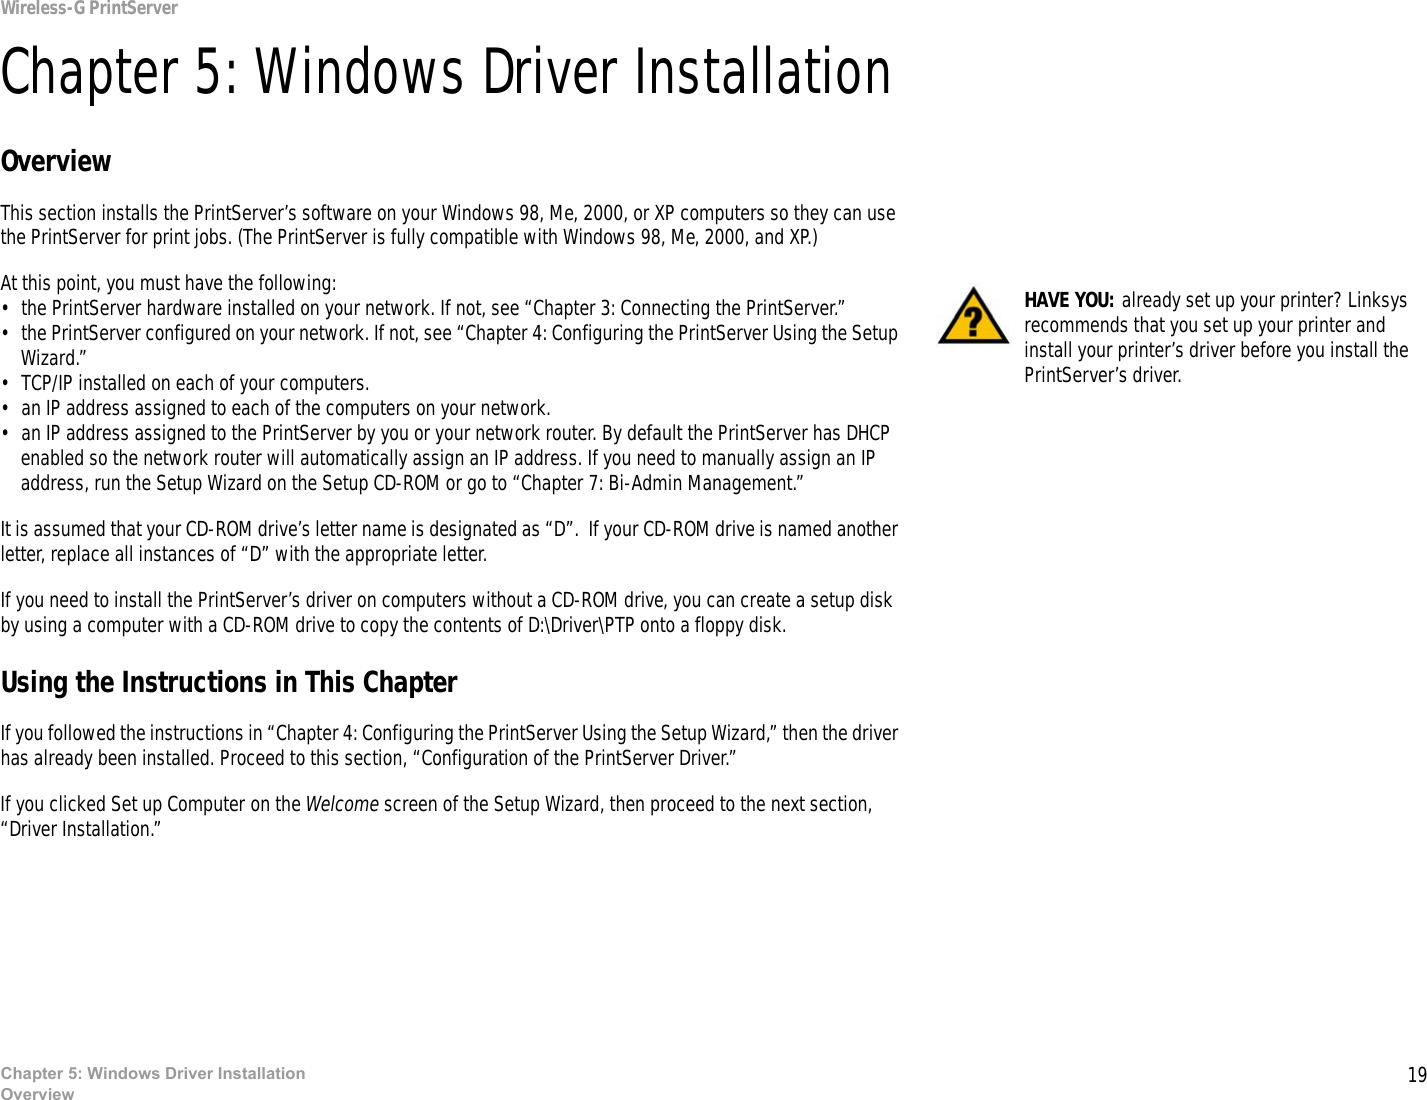 19Chapter 5: Windows Driver InstallationOverviewWireless-G PrintServerChapter 5: Windows Driver InstallationOverviewThis section installs the PrintServer’s software on your Windows 98, Me, 2000, or XP computers so they can use the PrintServer for print jobs. (The PrintServer is fully compatible with Windows 98, Me, 2000, and XP.)At this point, you must have the following:• the PrintServer hardware installed on your network. If not, see “Chapter 3: Connecting the PrintServer.”• the PrintServer configured on your network. If not, see “Chapter 4: Configuring the PrintServer Using the Setup Wizard.”• TCP/IP installed on each of your computers. • an IP address assigned to each of the computers on your network.• an IP address assigned to the PrintServer by you or your network router. By default the PrintServer has DHCP enabled so the network router will automatically assign an IP address. If you need to manually assign an IP address, run the Setup Wizard on the Setup CD-ROM or go to “Chapter 7: Bi-Admin Management.”It is assumed that your CD-ROM drive’s letter name is designated as “D”.  If your CD-ROM drive is named another letter, replace all instances of “D” with the appropriate letter.If you need to install the PrintServer’s driver on computers without a CD-ROM drive, you can create a setup disk by using a computer with a CD-ROM drive to copy the contents of D:\Driver\PTP onto a floppy disk. Using the Instructions in This ChapterIf you followed the instructions in “Chapter 4: Configuring the PrintServer Using the Setup Wizard,” then the driver has already been installed. Proceed to this section, “Configuration of the PrintServer Driver.”If you clicked Set up Computer on the Welcome screen of the Setup Wizard, then proceed to the next section, “Driver Installation.”HAVE YOU: already set up your printer? Linksys recommends that you set up your printer and install your printer’s driver before you install the PrintServer’s driver.